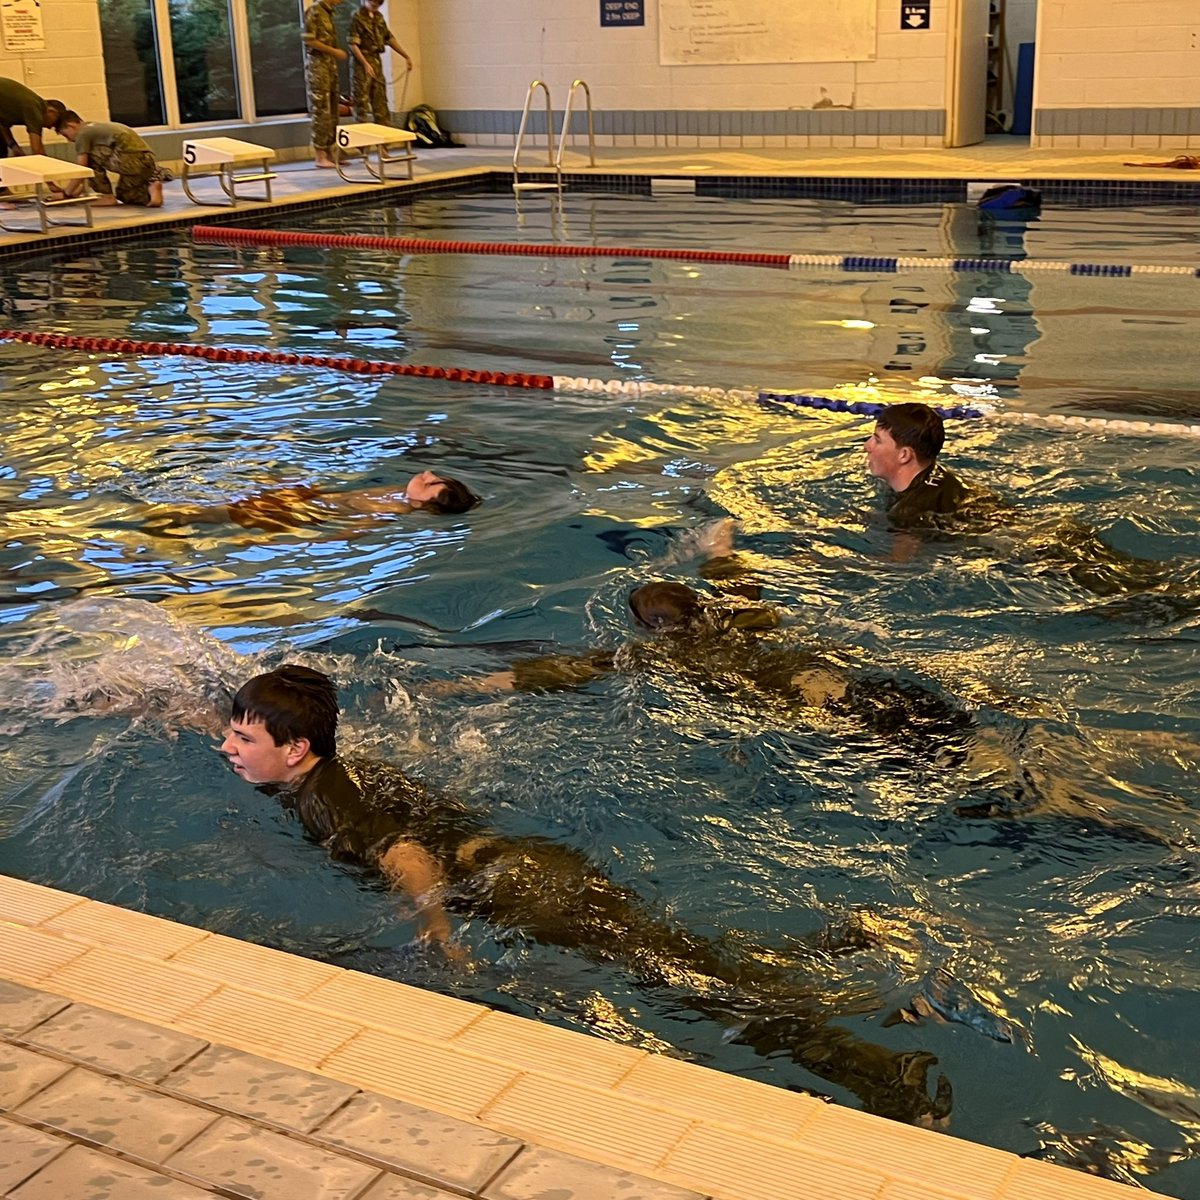 A wonderful display of determination and skill in the Cadet Force Swim Test by our Year 10 CCF cadets today! A big shout-out to Ray for his expert guidance 🏊‍♂️🌟 @CCFcadets #FutureLeaders @HabsMonmouth @RNinWales